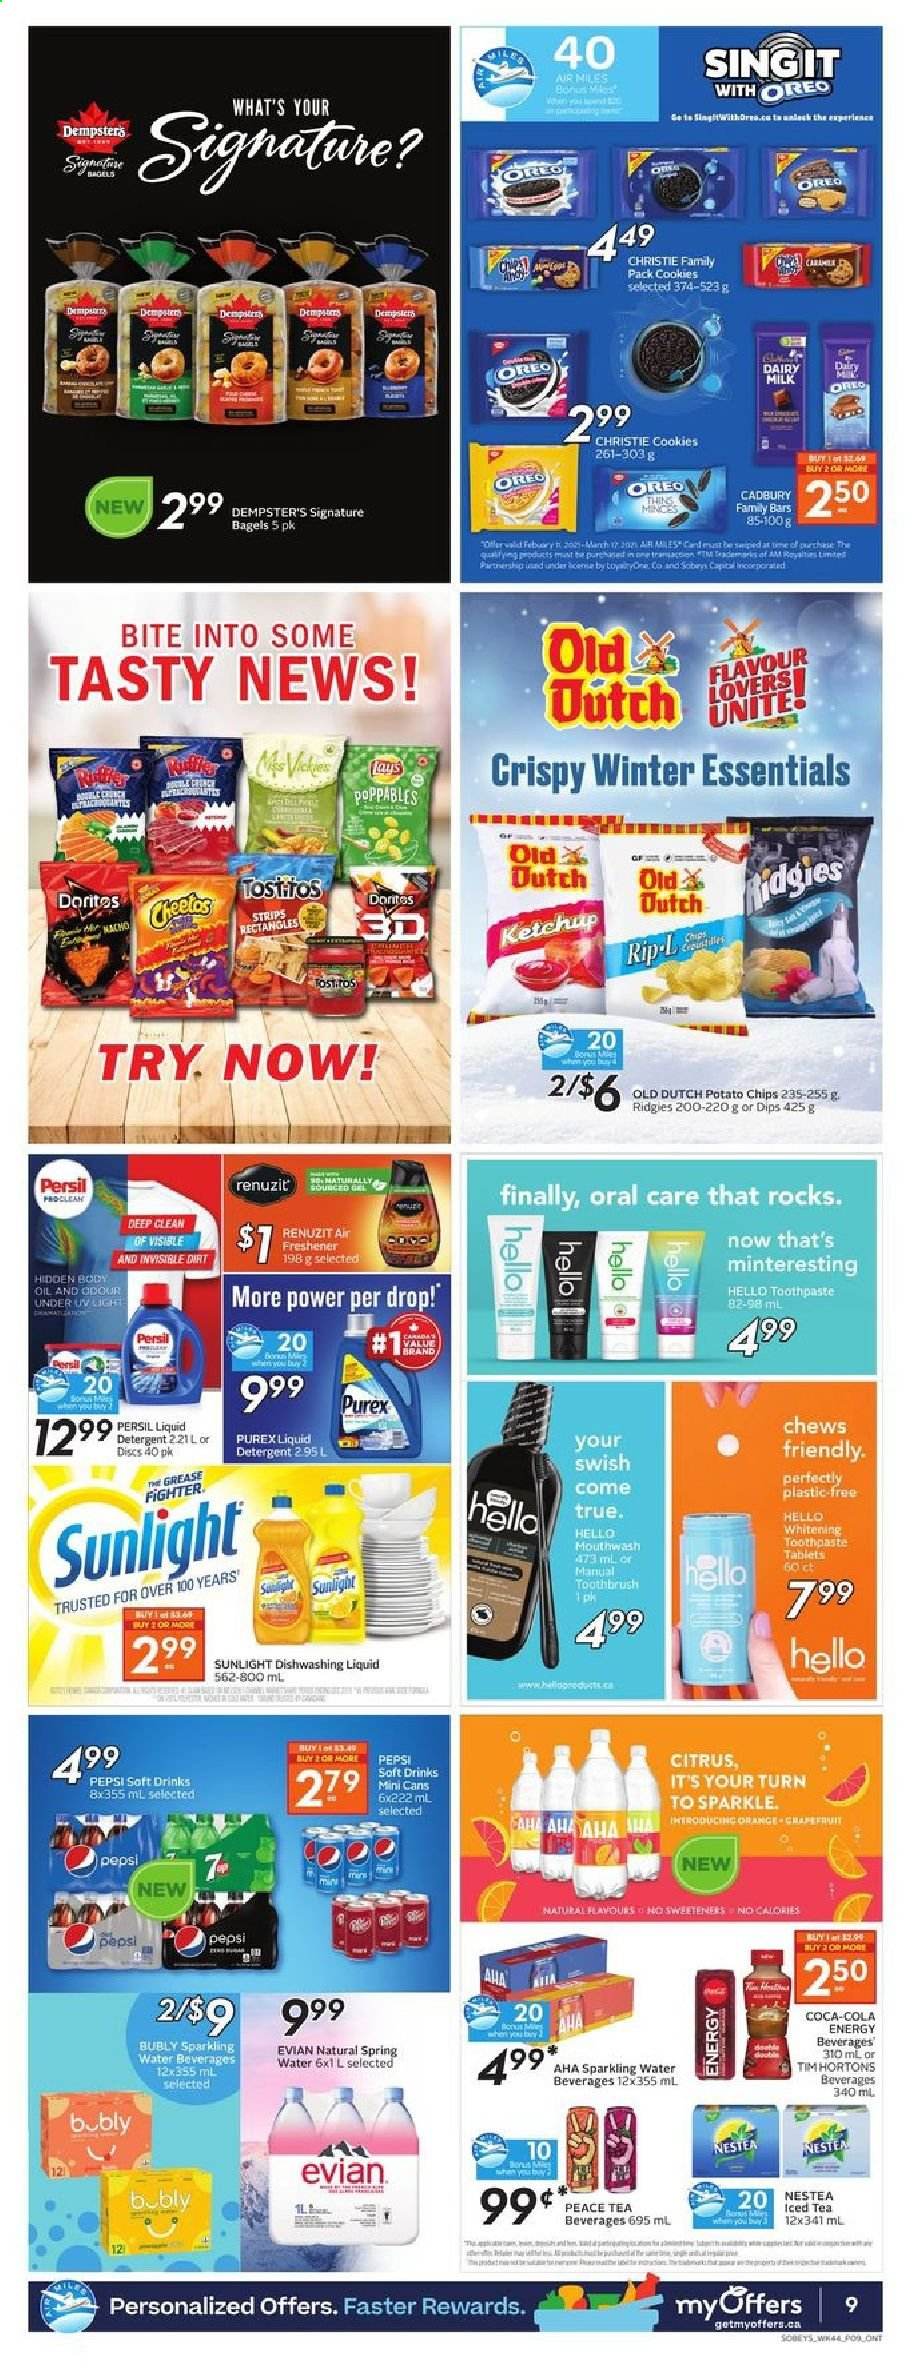 thumbnail - Sobeys Flyer - February 25, 2021 - March 03, 2021 - Sales products - bagels, Oreo, strips, cookies, chewing gum, Cadbury, Dairy Milk, Doritos, potato chips, Coca-Cola, Pepsi, ice tea, soft drink, spring water, sparkling water, Evian, Persil, liquid detergent, Sunlight, Purex, dishwashing liquid, toothbrush, toothpaste, mouthwash, body oil, chips. Page 10.